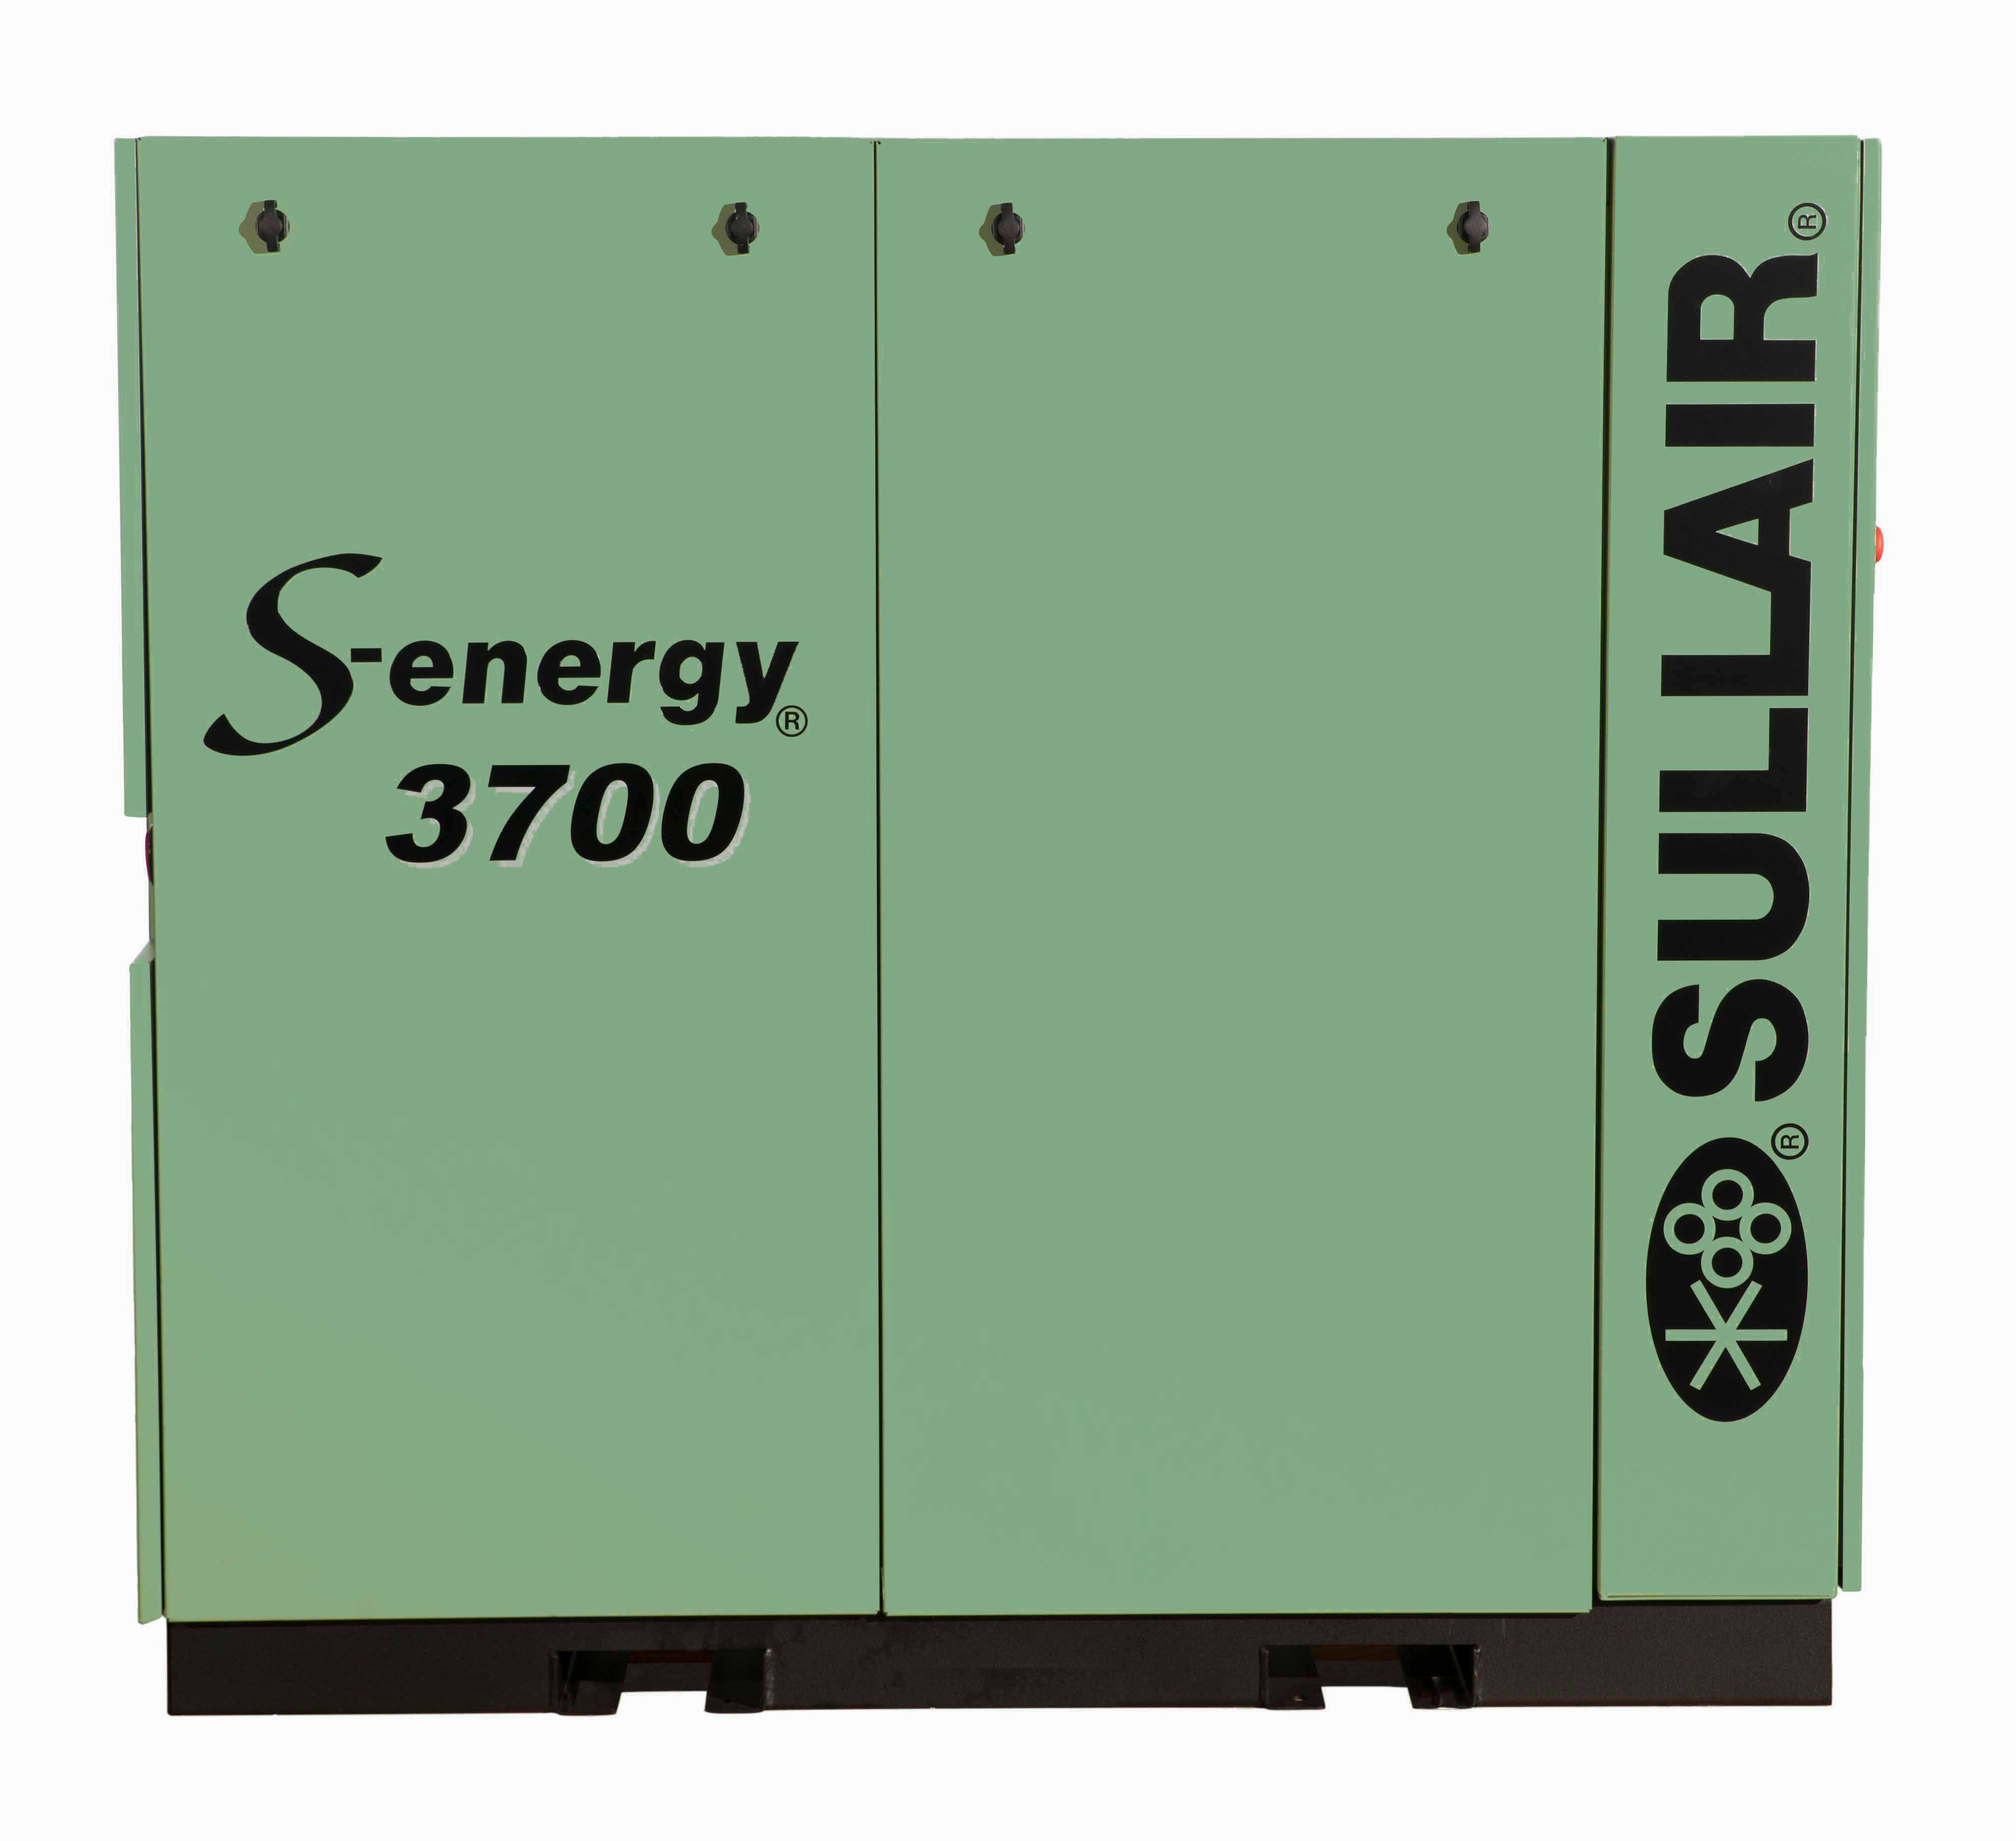 lubricated rotary screw industrial air compressors